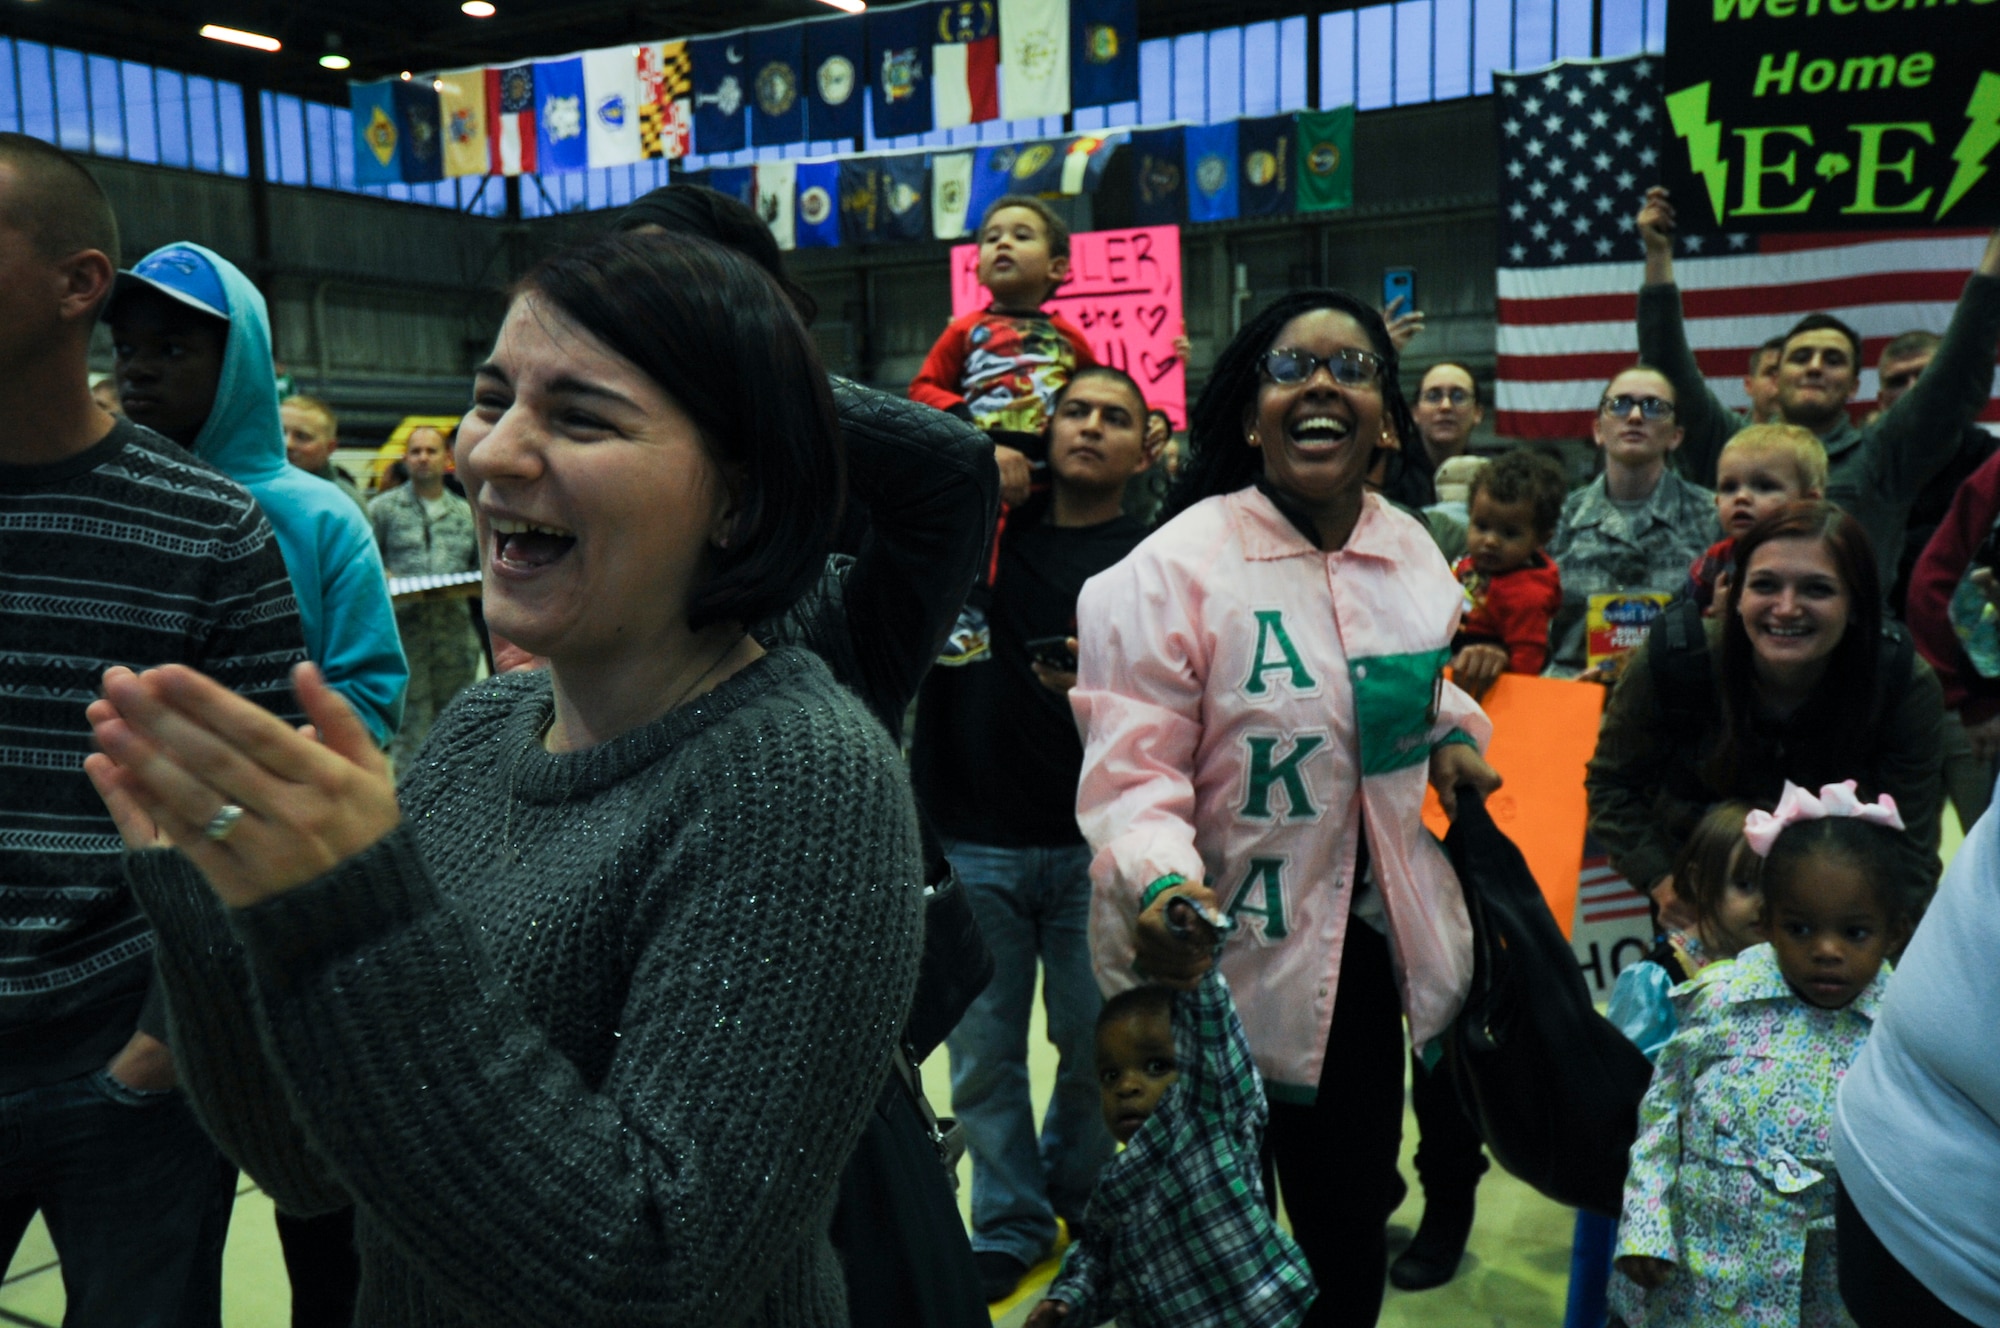 Family members cheer as Airmen assigned to the 480th Expeditionary Fighter Squadron arrive during the squadron’s return to Spangdahlem Air Base, Germany, Oct. 12, 2016. Approximately 300 of the Airmen, who serve in flight, maintenance or support roles for the F-16 Fighting Falcon fighter aircraft, completed a six-month deployment to Southwest Asia by providing close air support and dynamic targeting operations as part of the squadron’s first deployment in support of Operation Inherent Resolve. Operation Inherent Resolve aims to eliminate the Da'esh terrorist group and the threat they pose to Iraq, Syria and the wider international community. (U.S. Air Force photo by Staff Sgt. Joe W. McFadden)